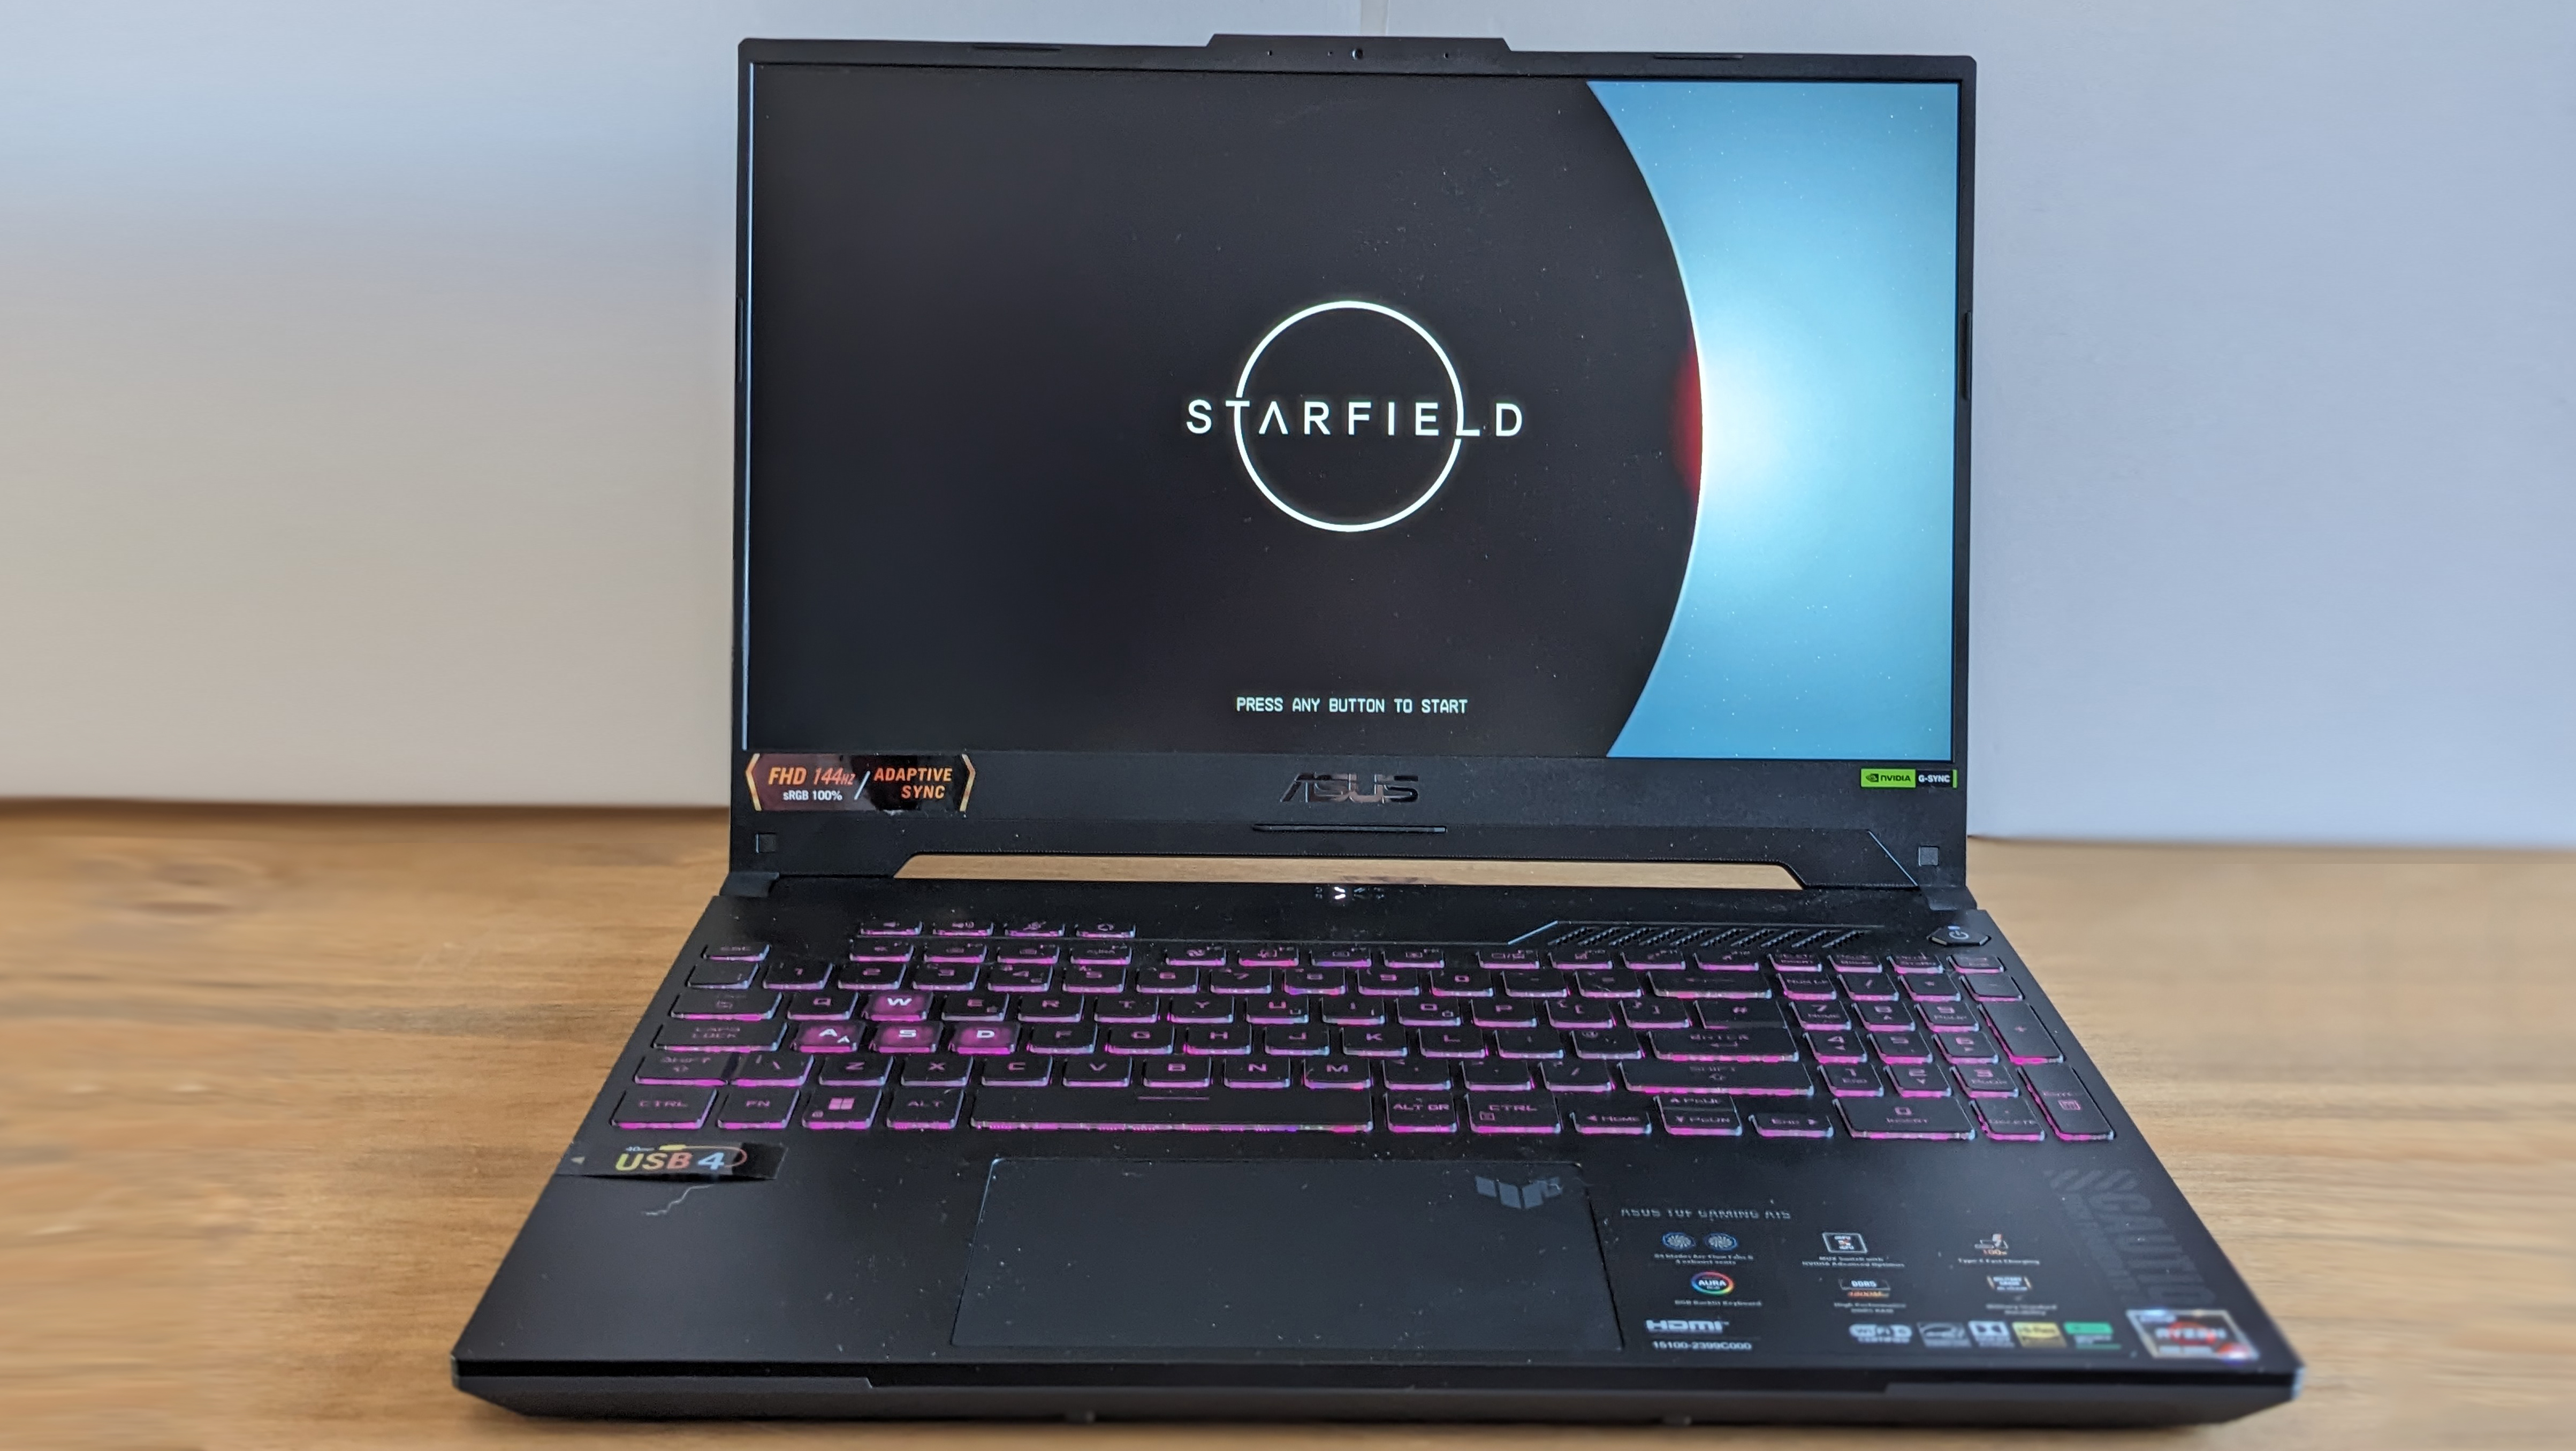 ASUS TUF Gaming A15 review: shining performance on a reasonable budget